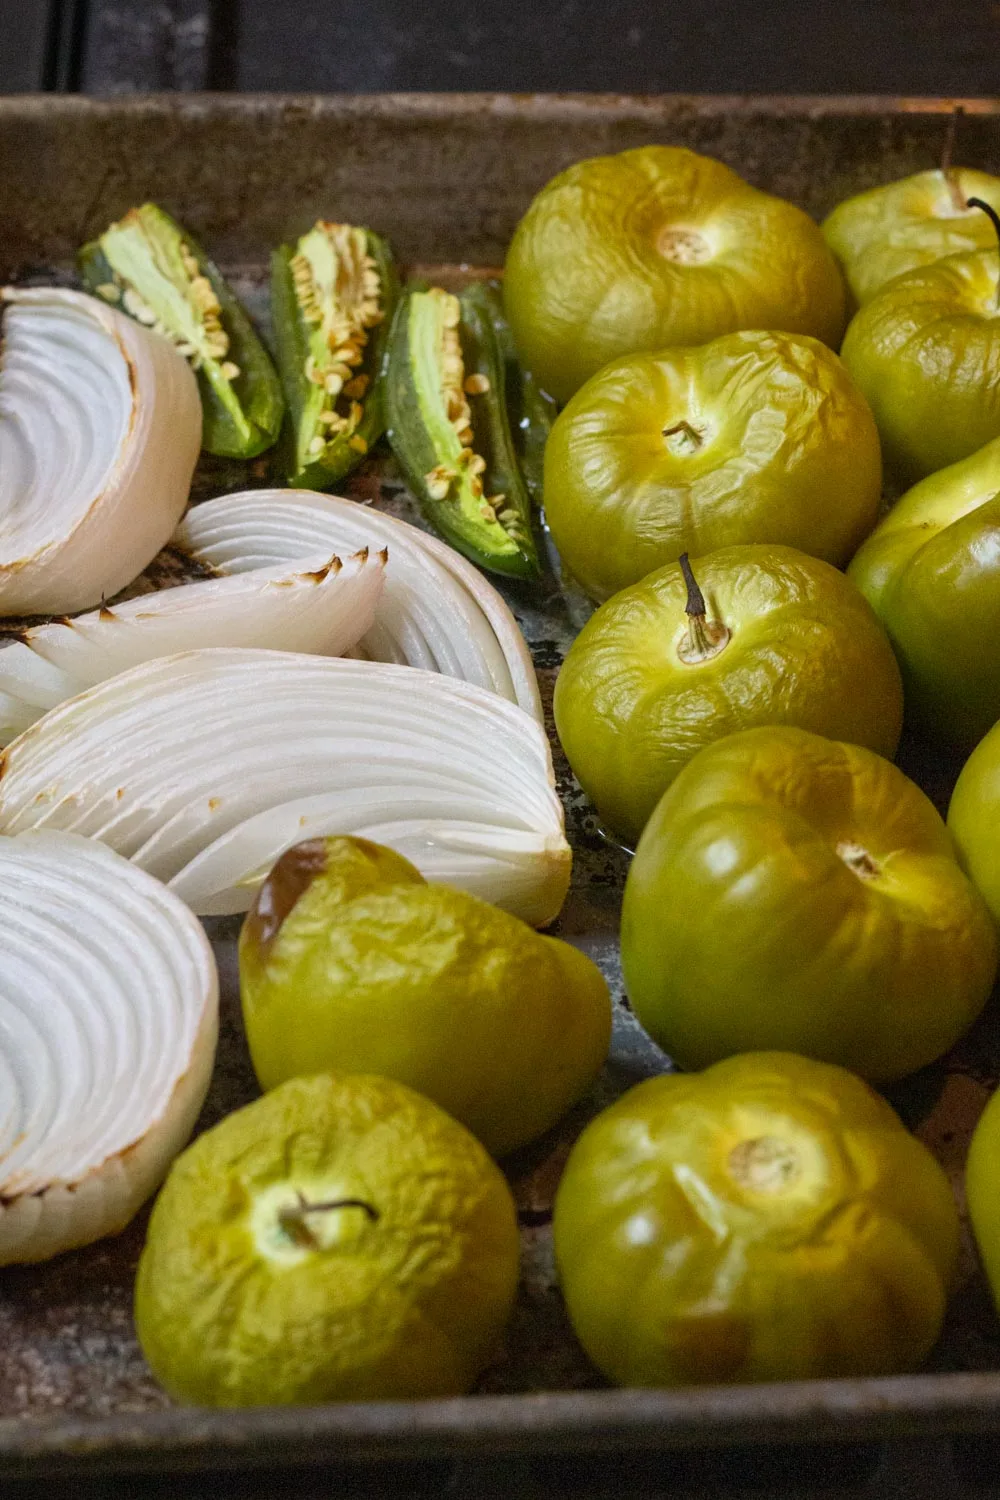 Roasted tomatillos which are wrinkly and a golden color. Onions and chiles are softened and golden.